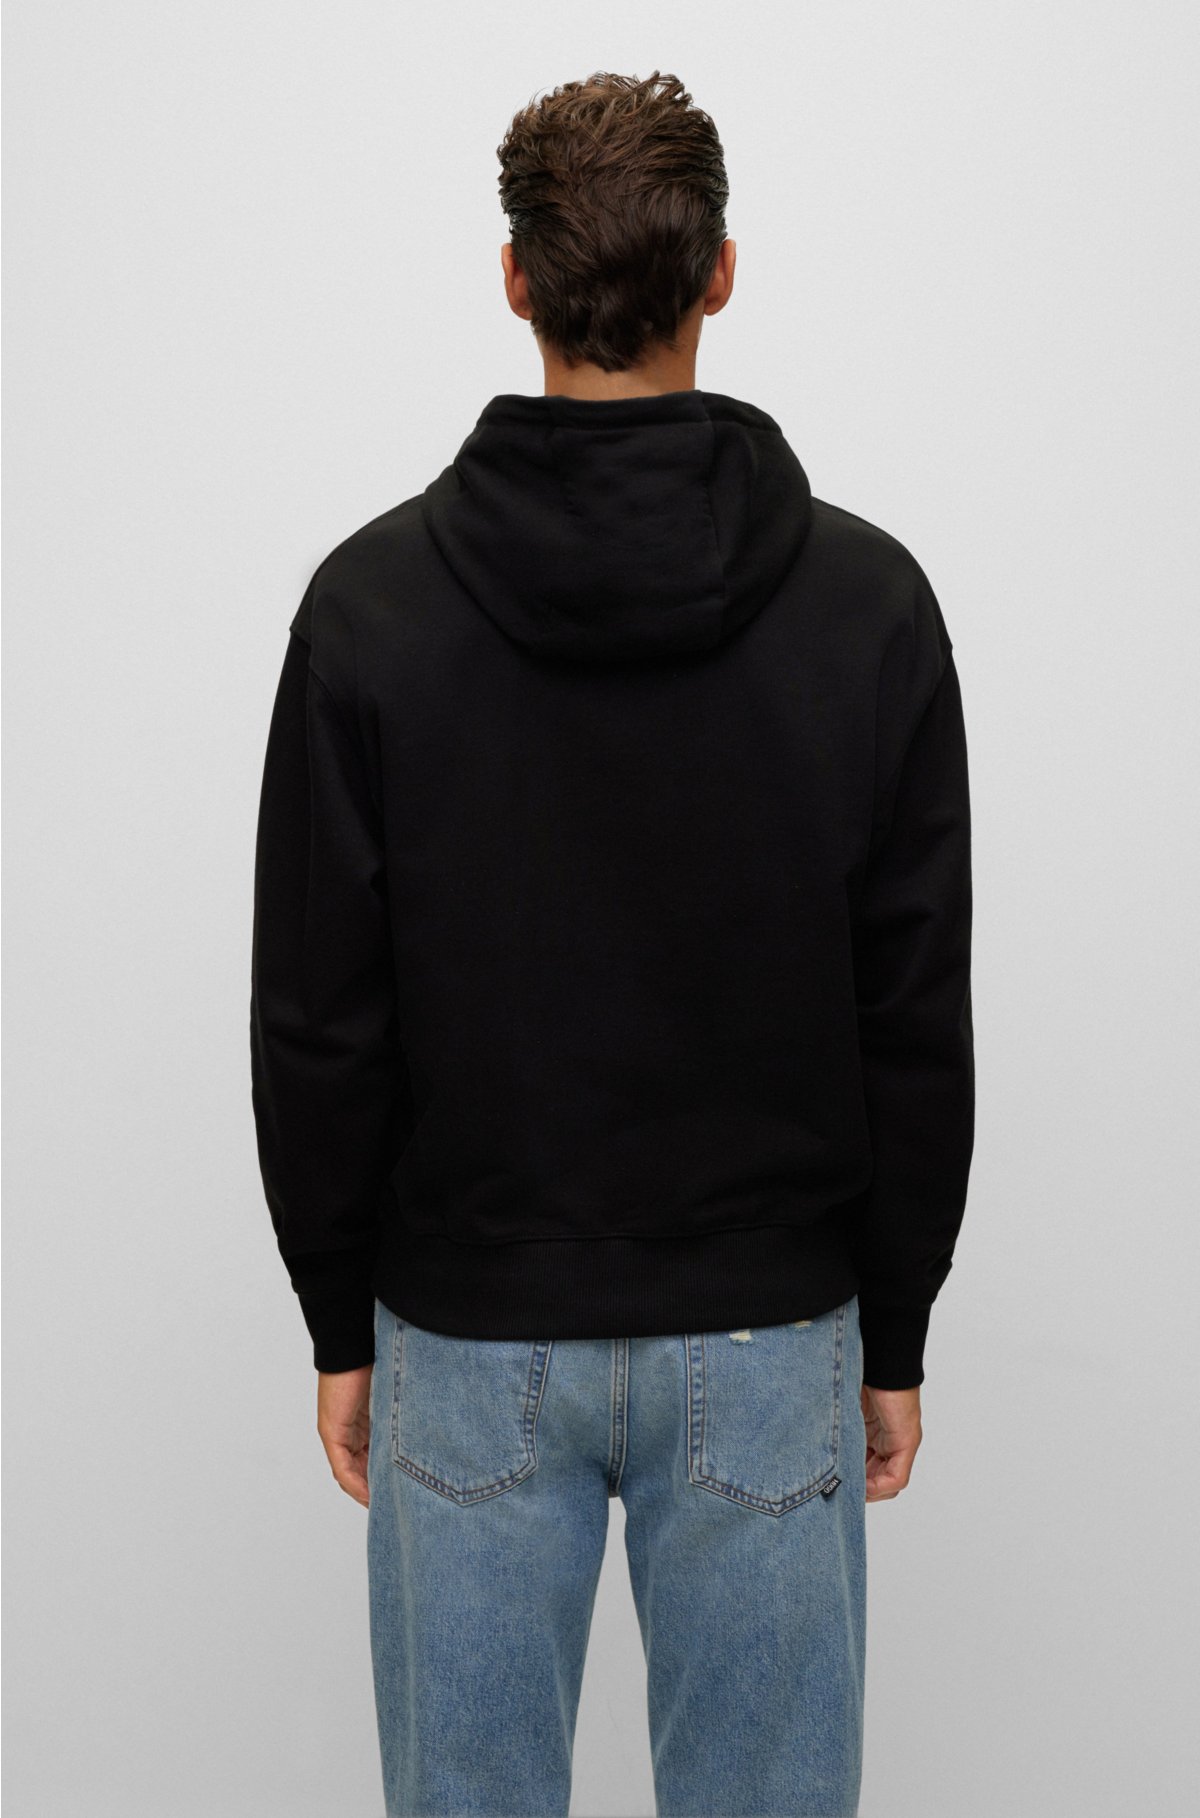 All-gender relaxed-fit hoodie